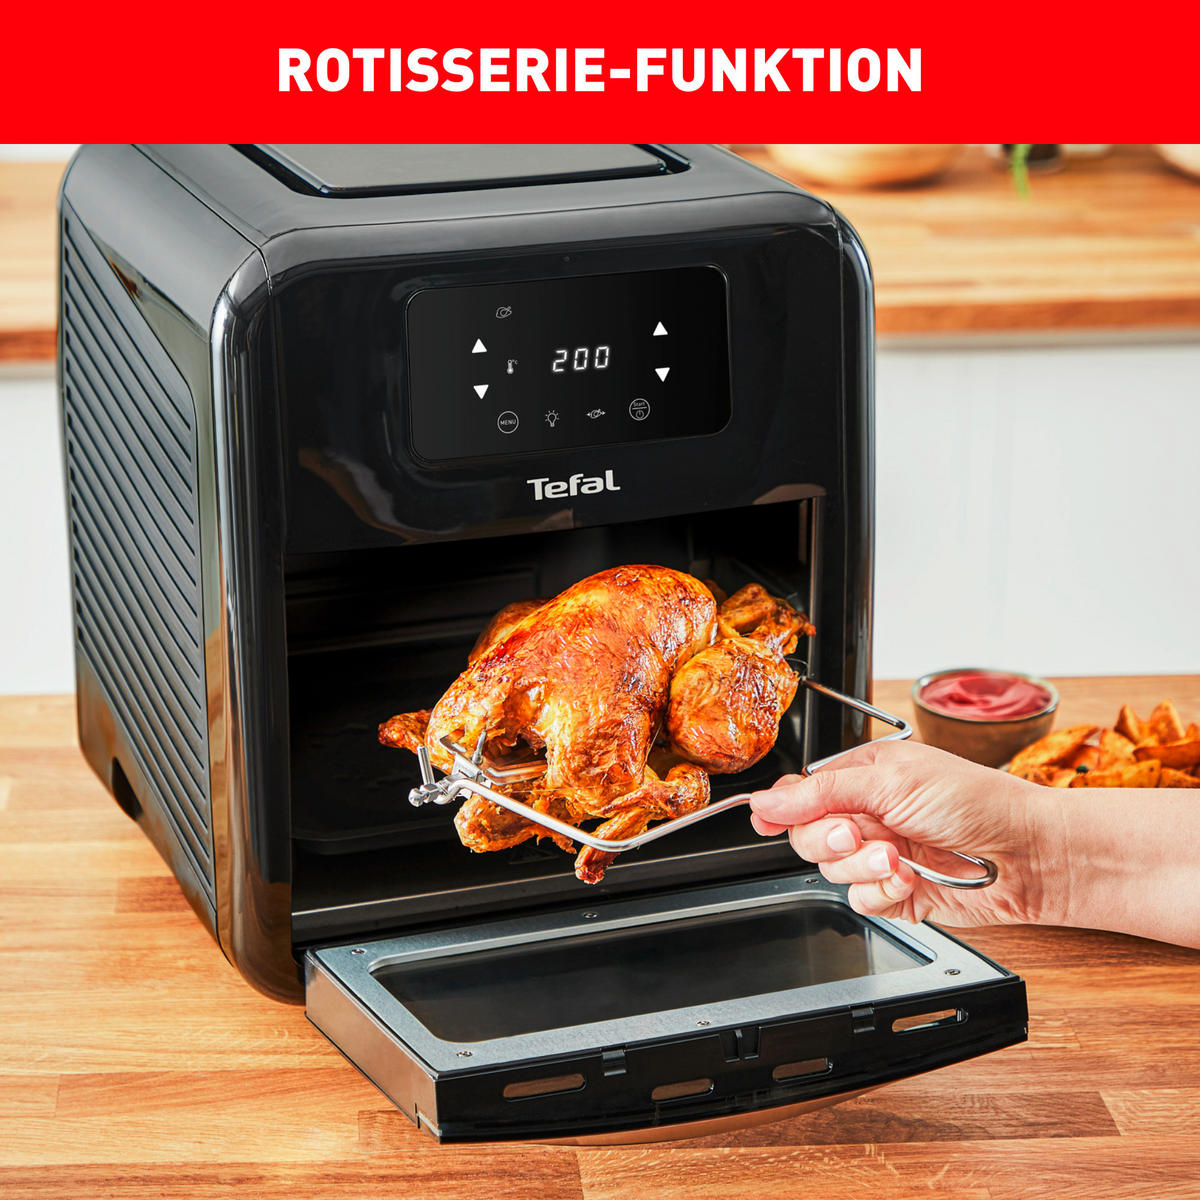 Fry Oven & Grill TEFAL Fritteuse \